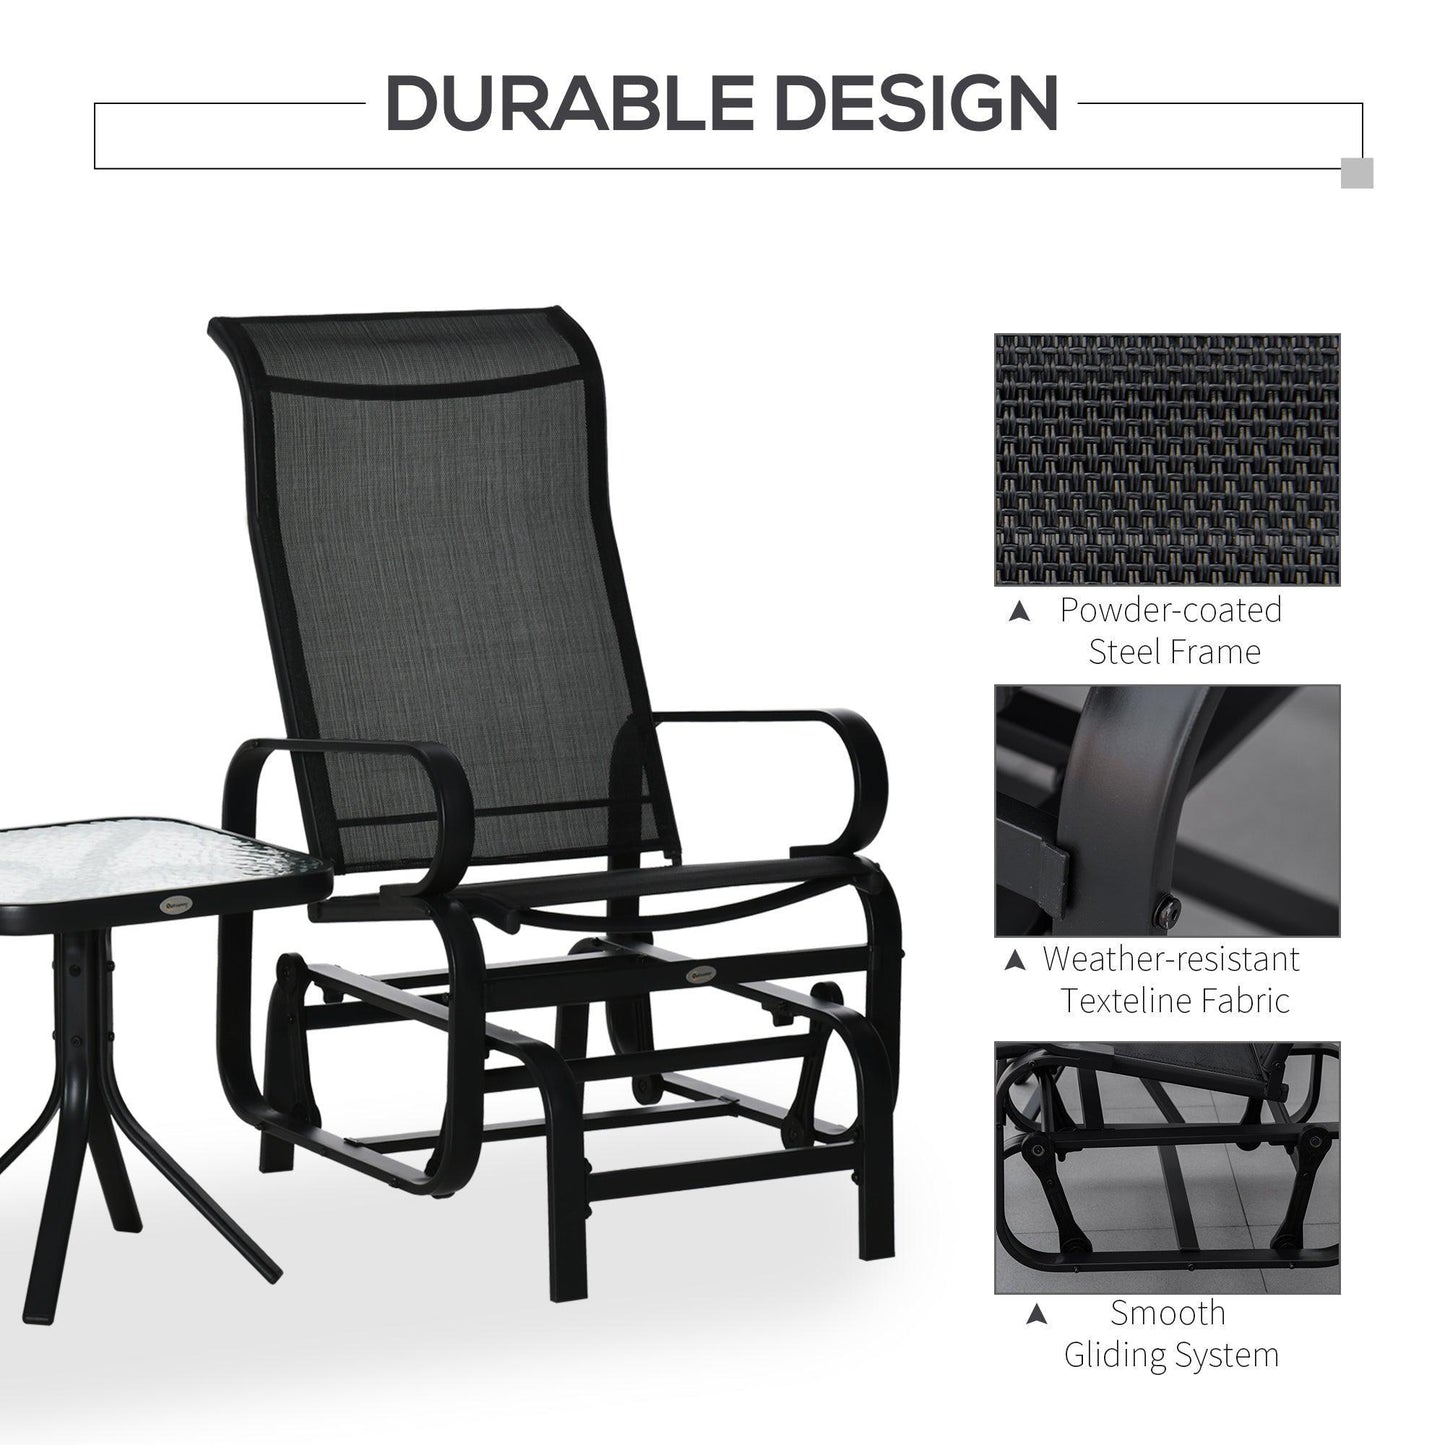 Outsunny 3-Piece Outdoor Glider Rocking Chair Set with Table - Black - ALL4U RETAILER LTD